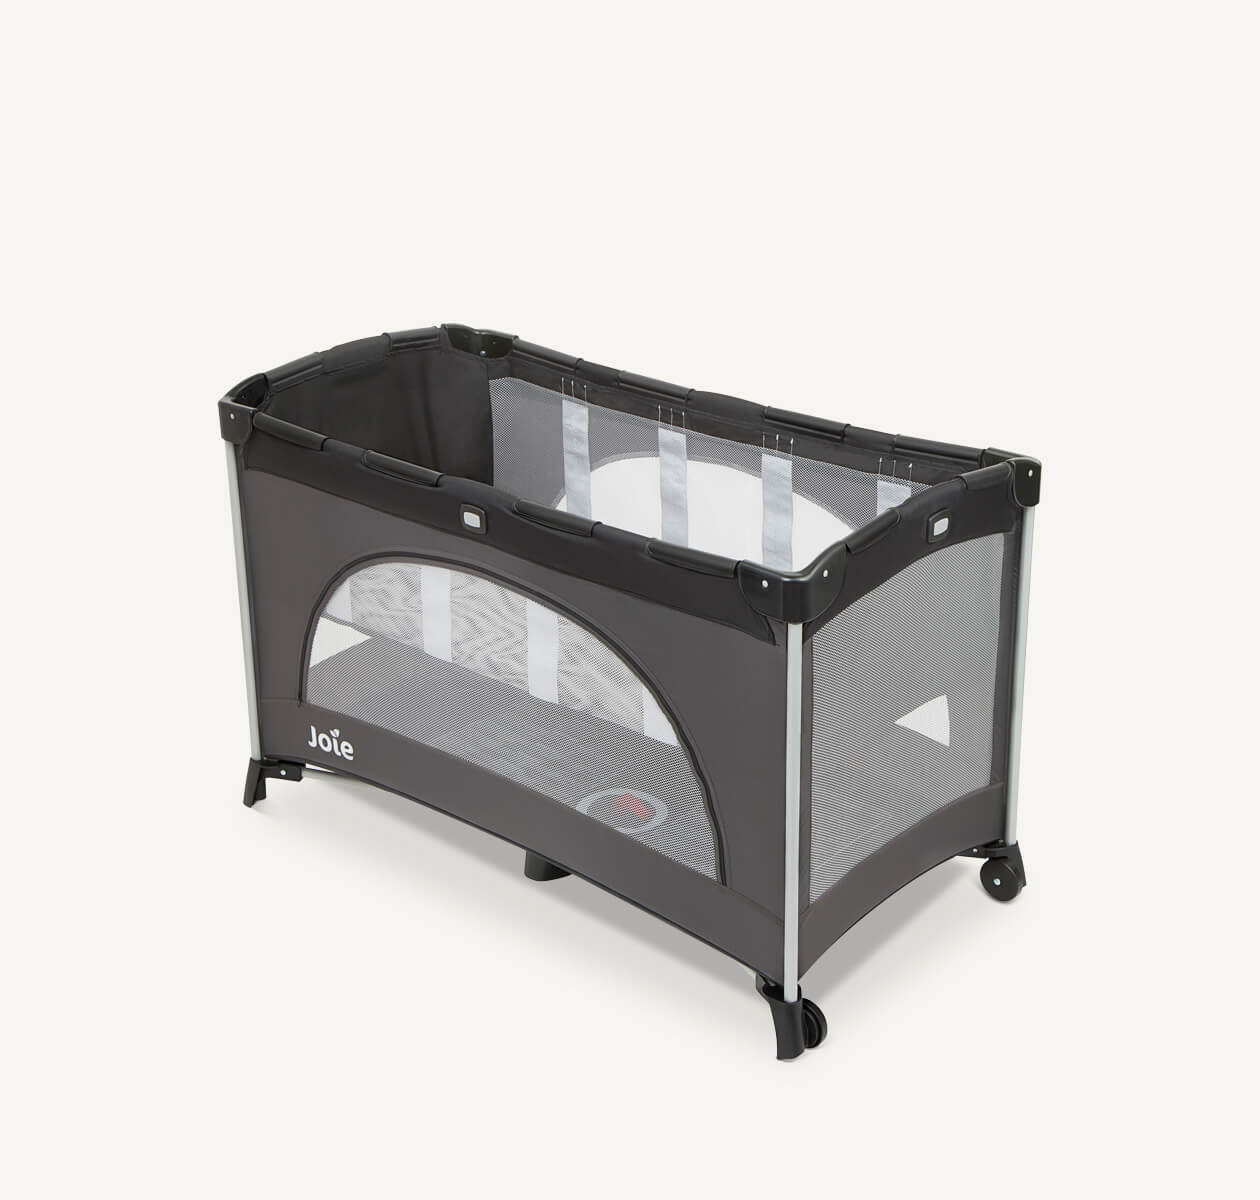 The Joie travel cot allura in grey and black with a bassinet at a right angle. 